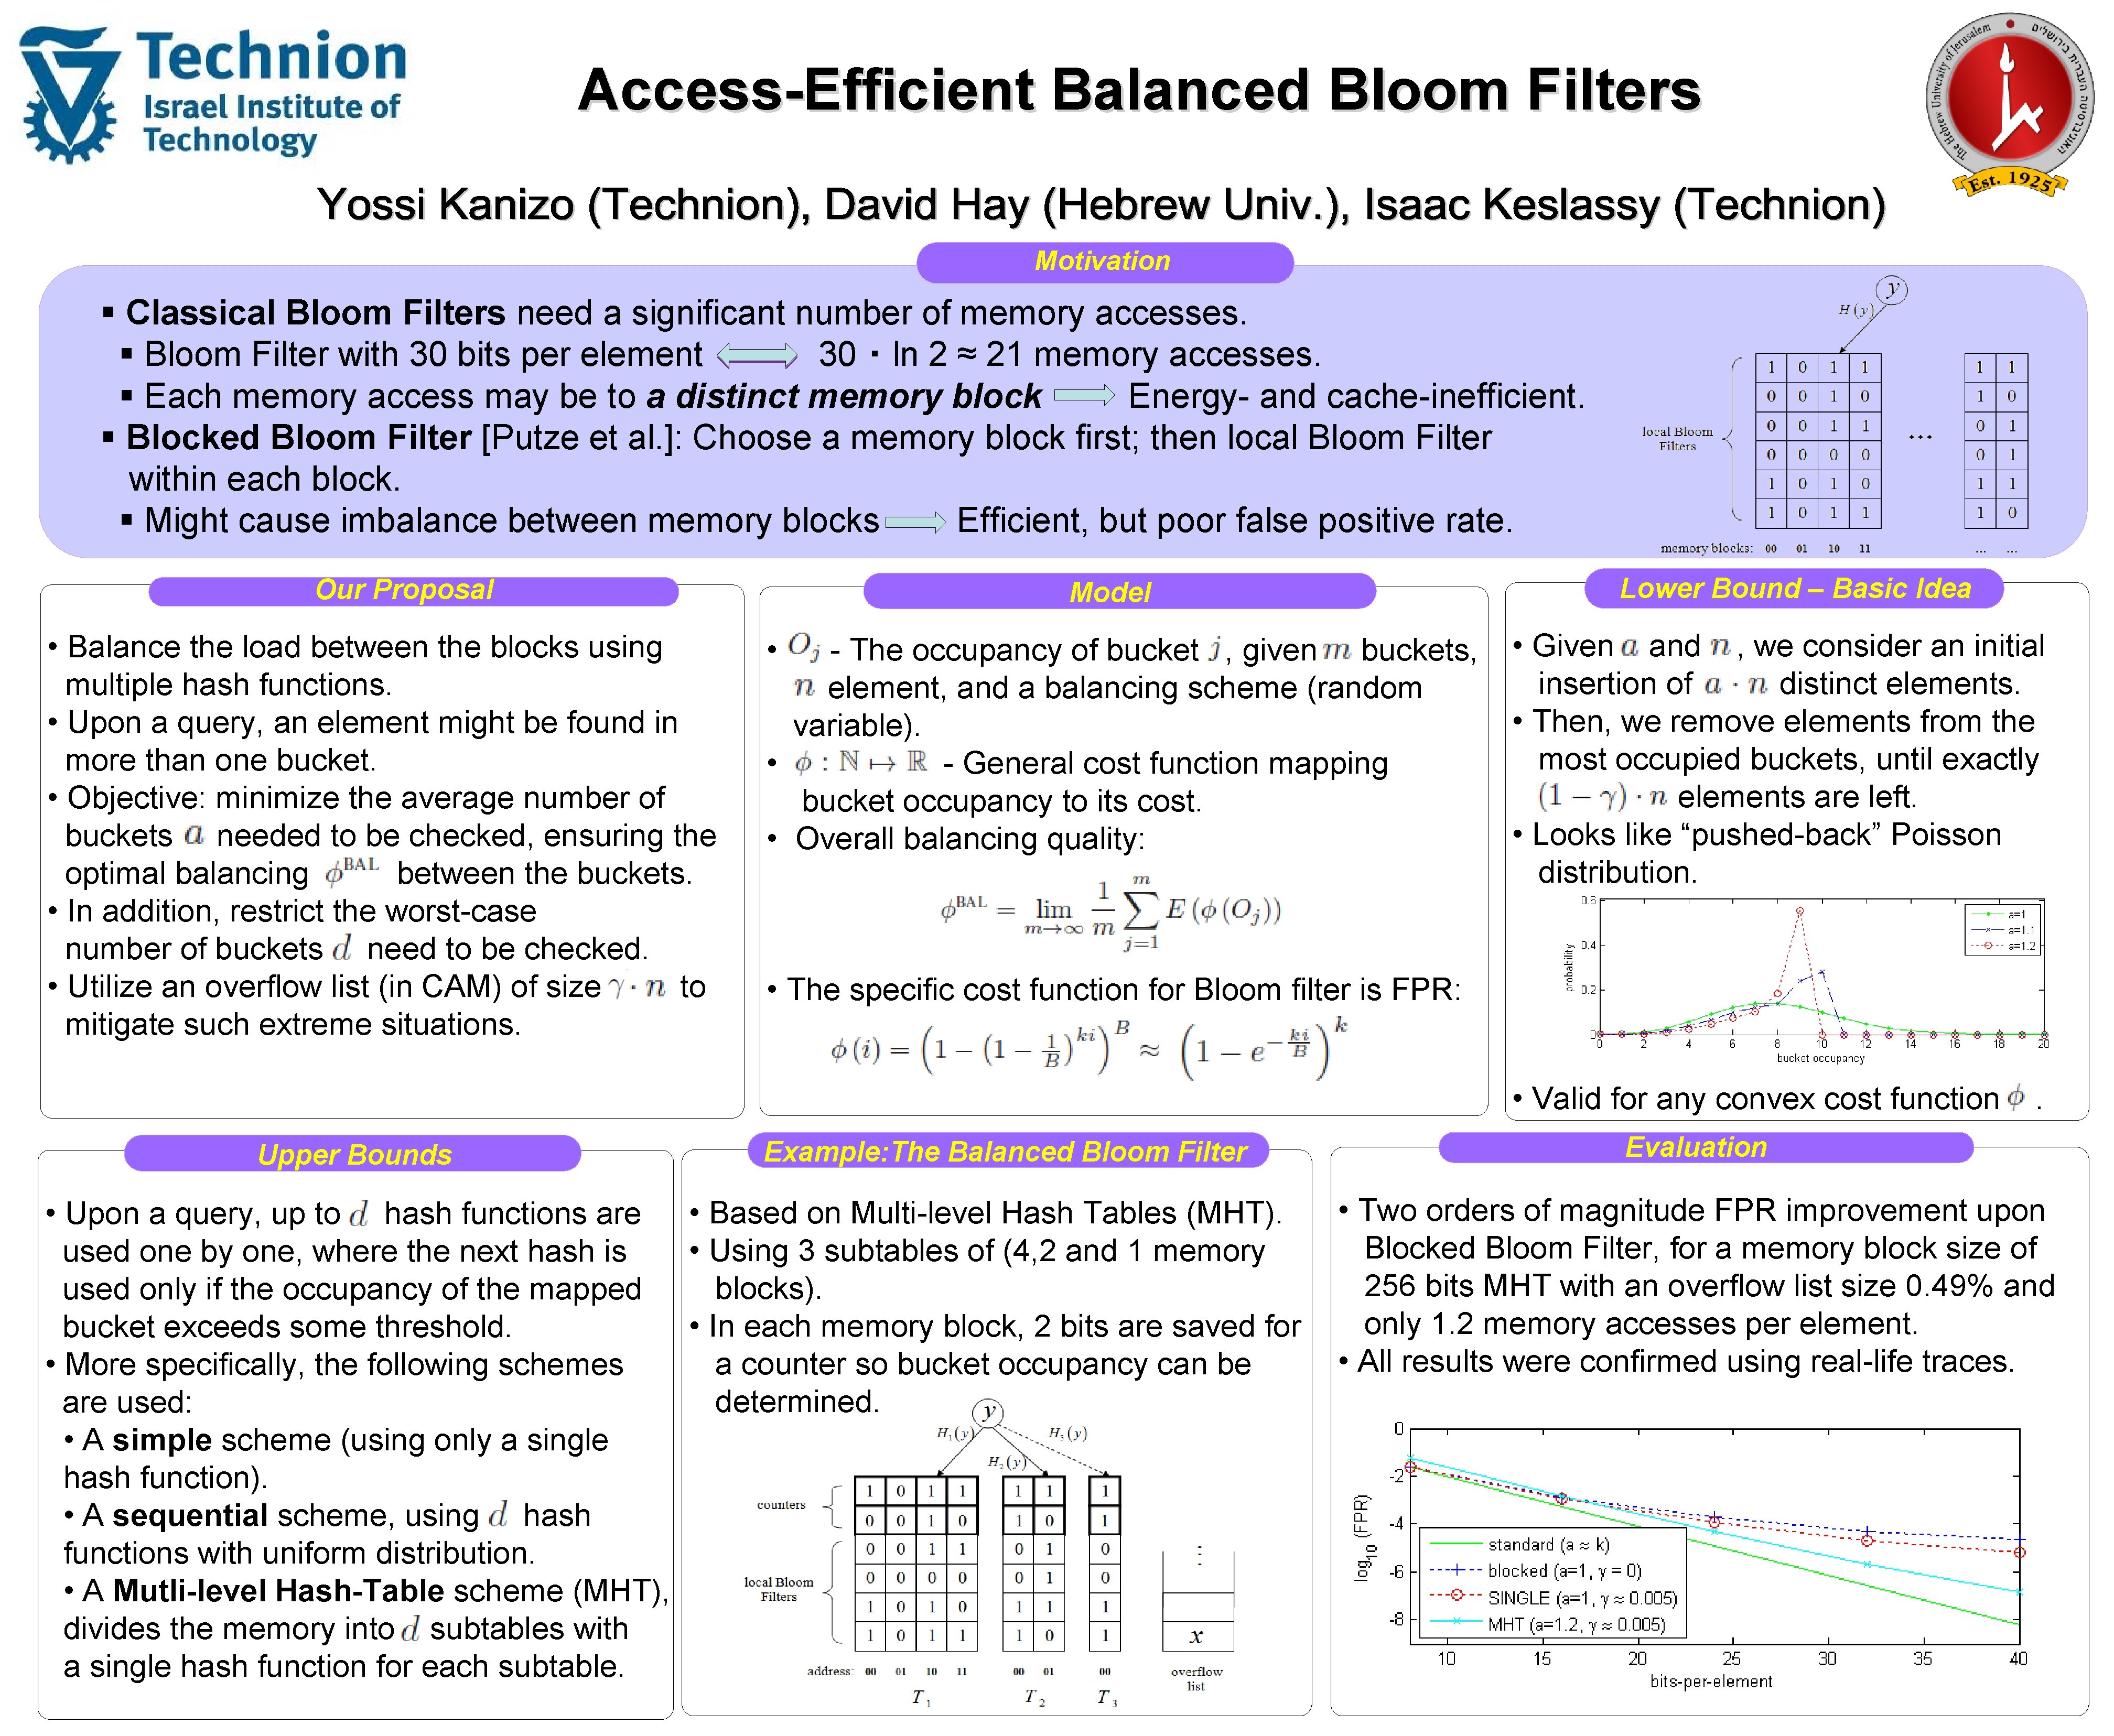 Access-Efficient Balanced Bloom Filters Motivation § Classical Bloom Filters need a significant number of